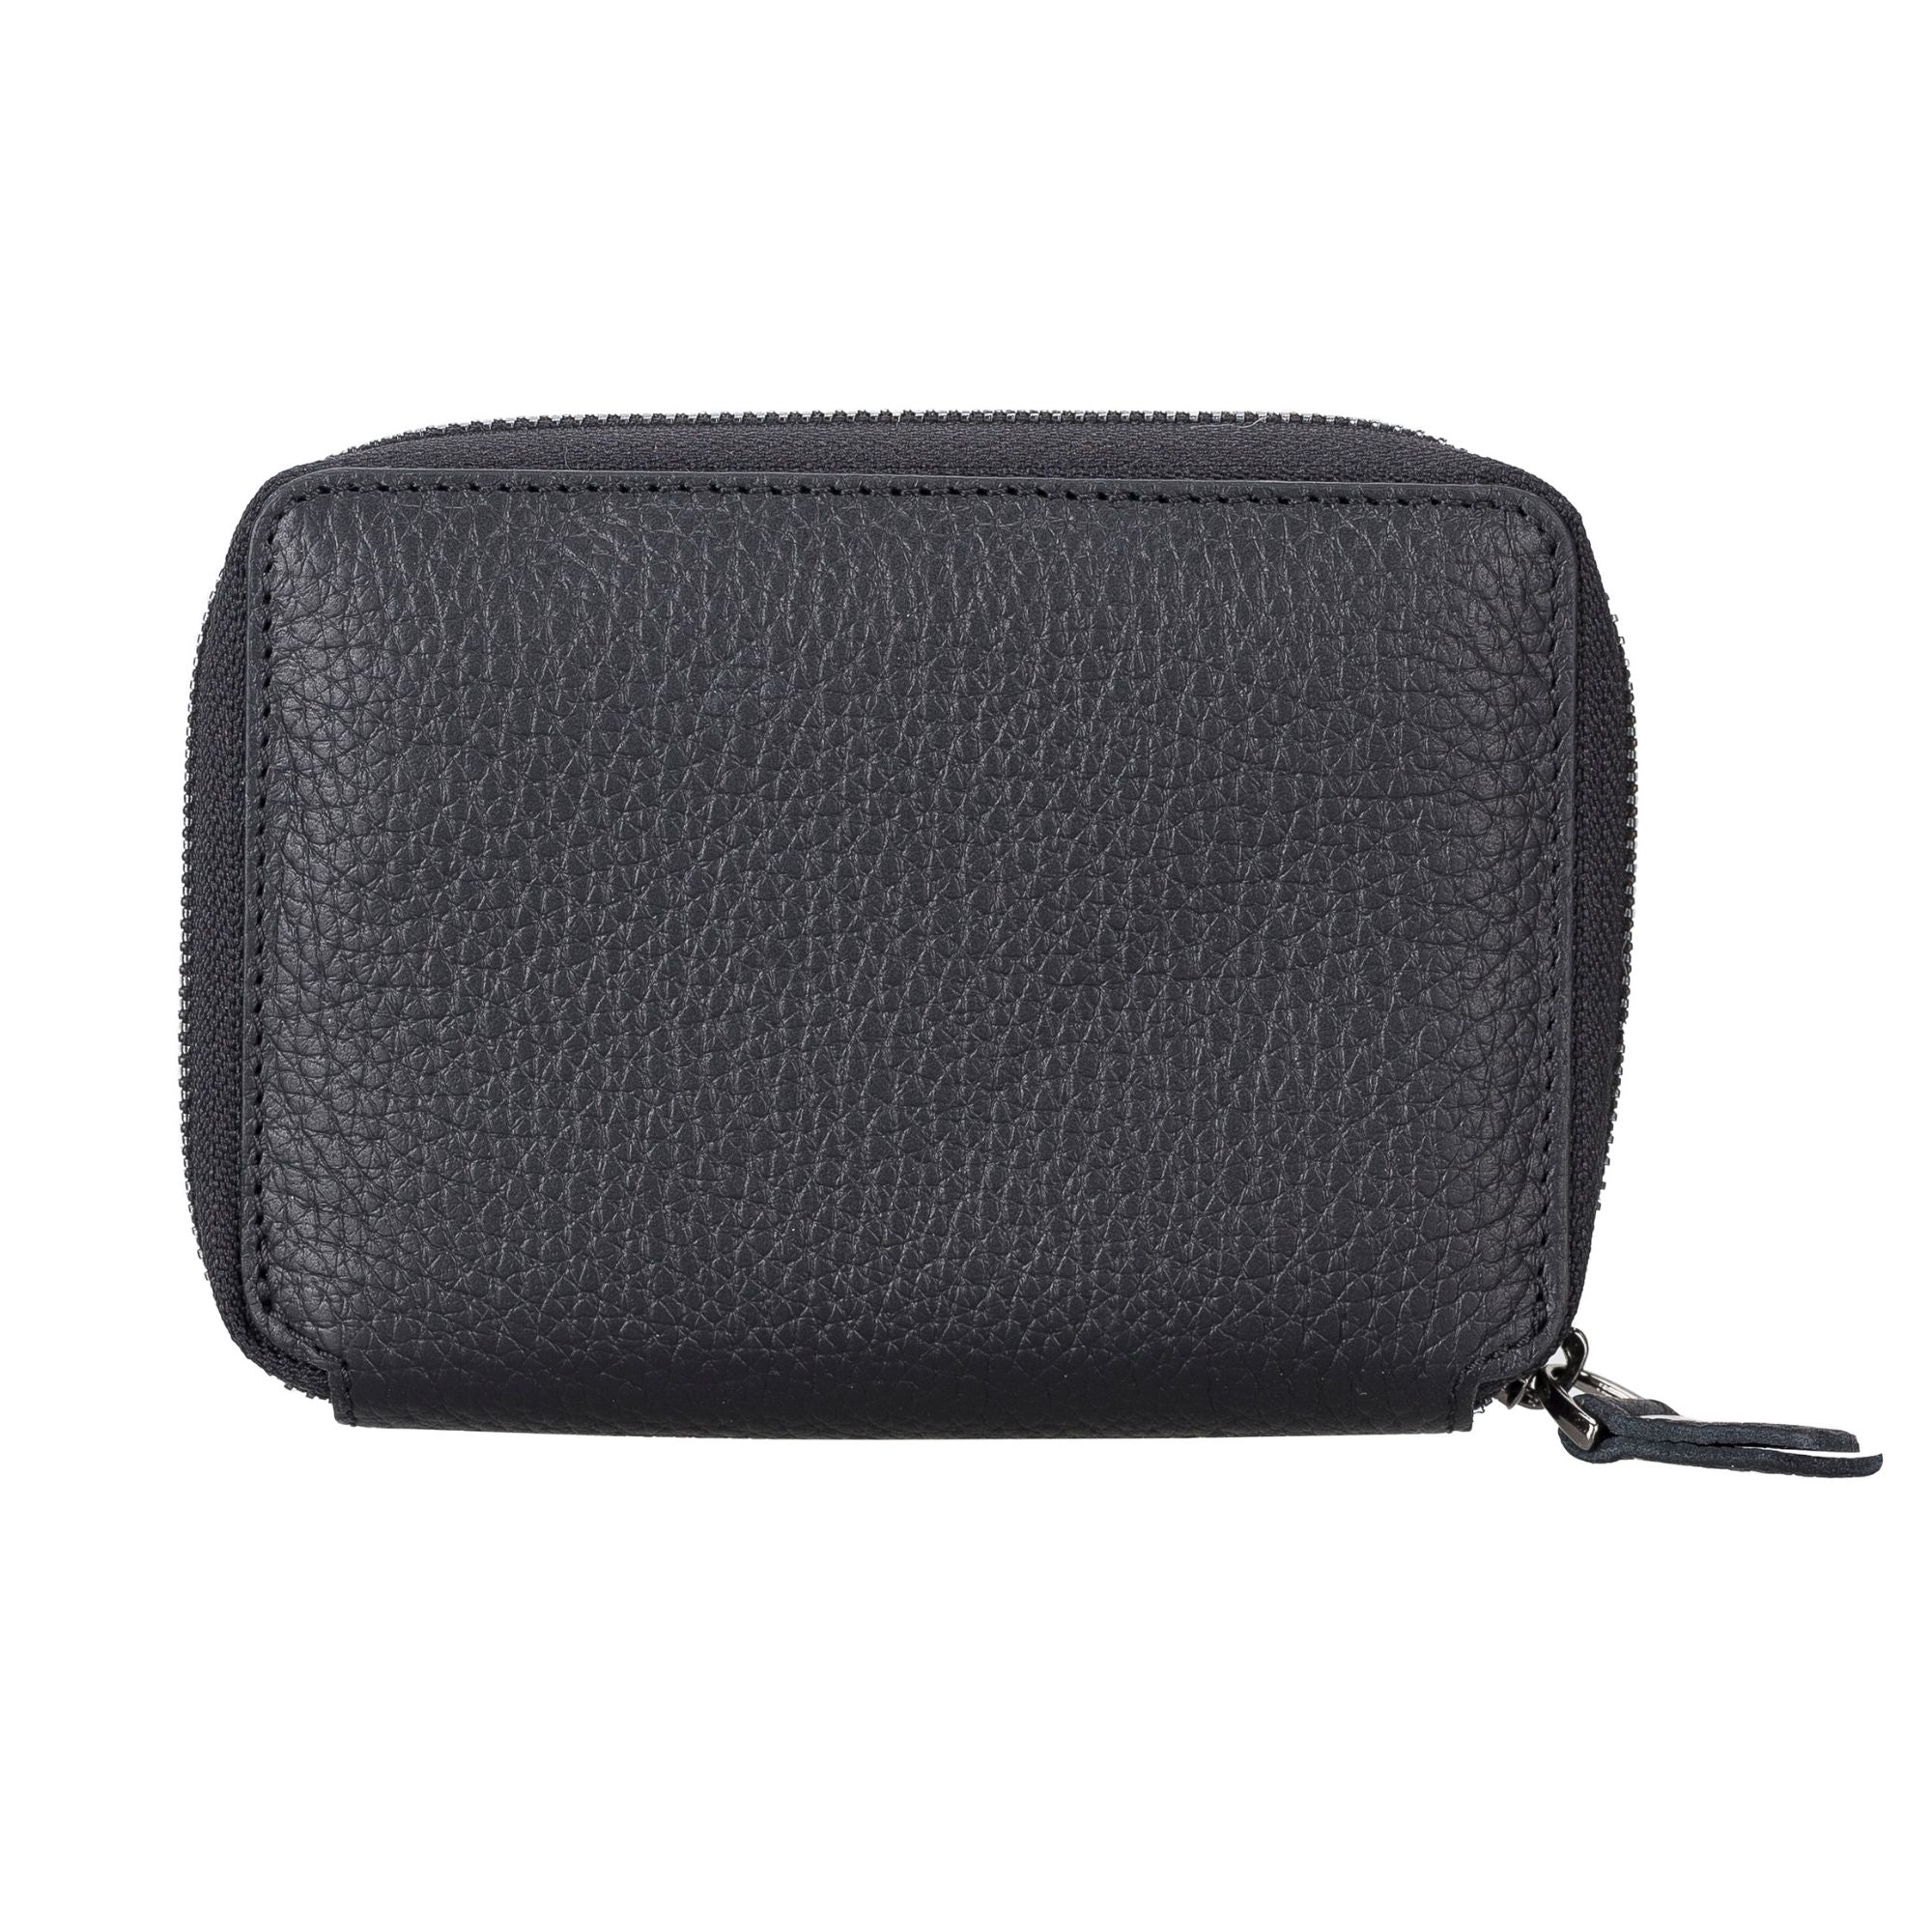 Powell Handmade Unisex Leather Wallet with Zippered Compartment - Black - TORONATA